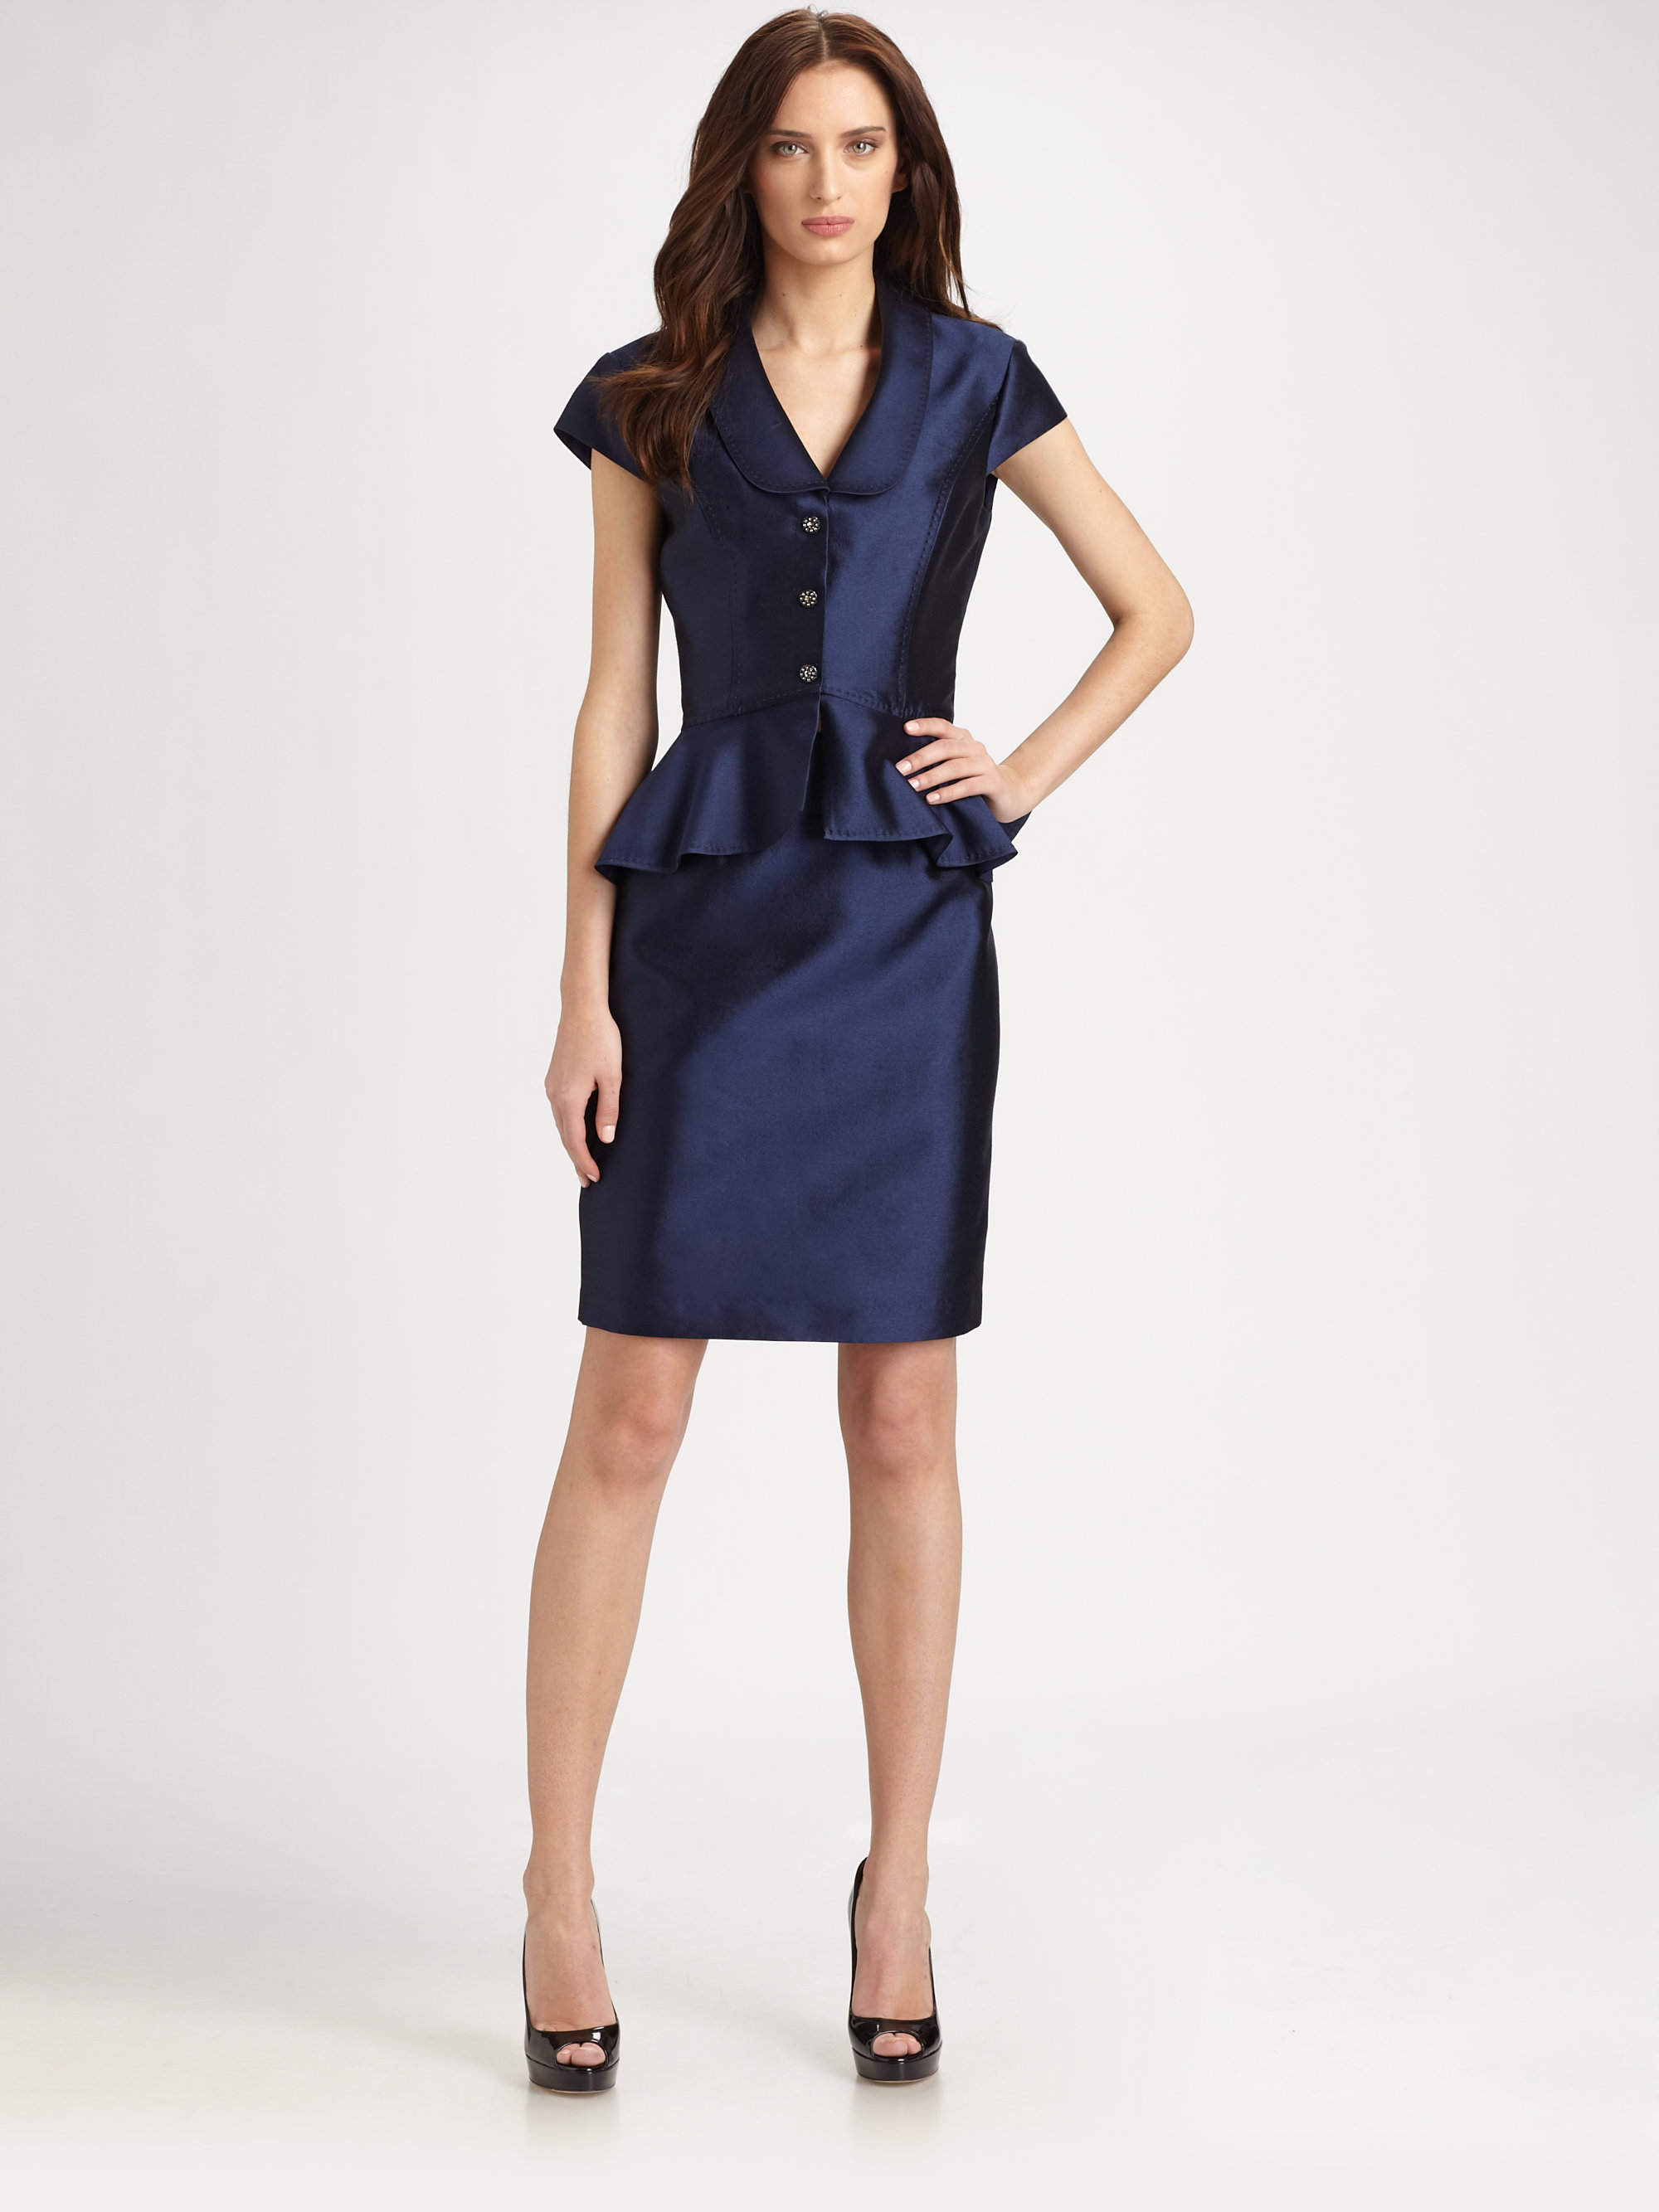 Lyst - Kay Unger Satin Suit in Blue